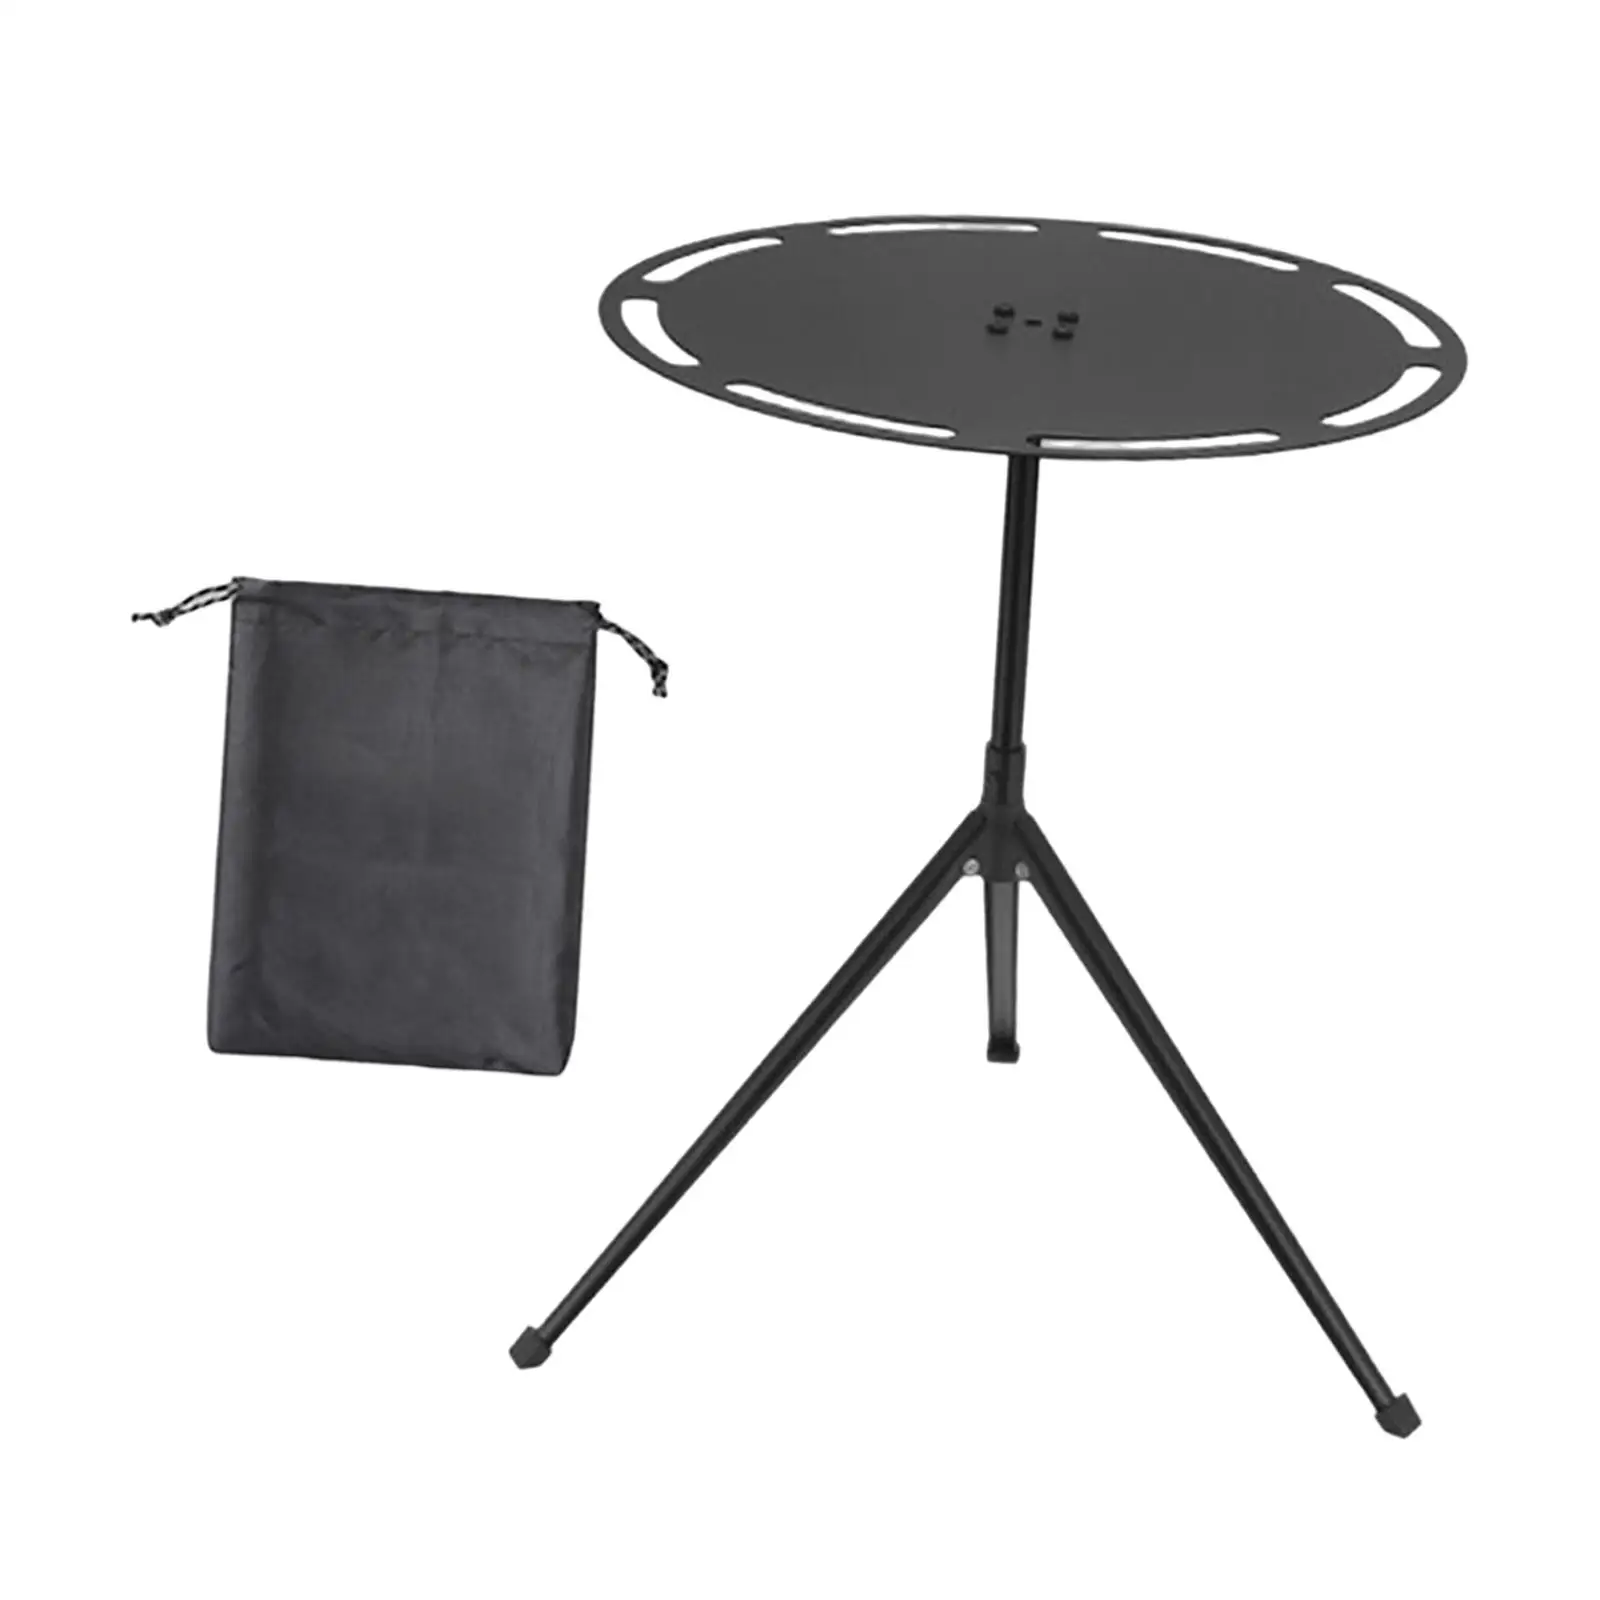 Camping Table Round Compact Height Adjustable Furniture with Carry Bag Folding Table for Outdoor Travel BBQ Fishing Mountaintop